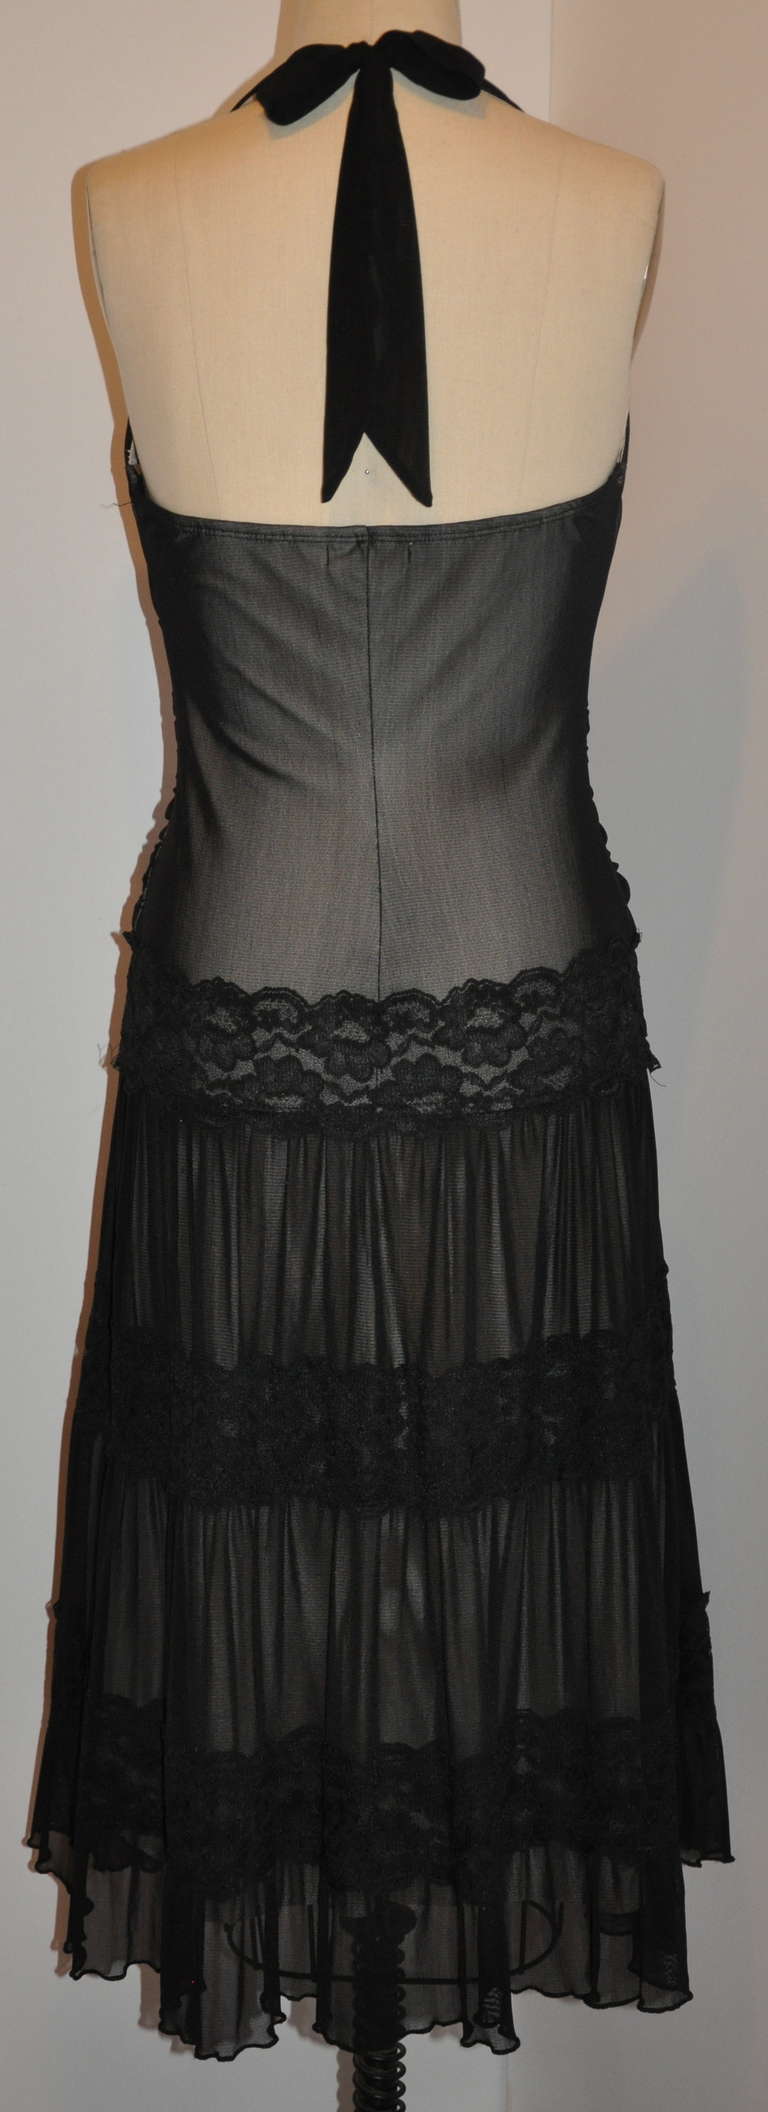 This elegant, yet sexy black lounge dress has three (3) tier of net and lace combination. Nylon and spandex makes for a perfect fit over one's curves. B-Cup on the breasts and accented with a 18